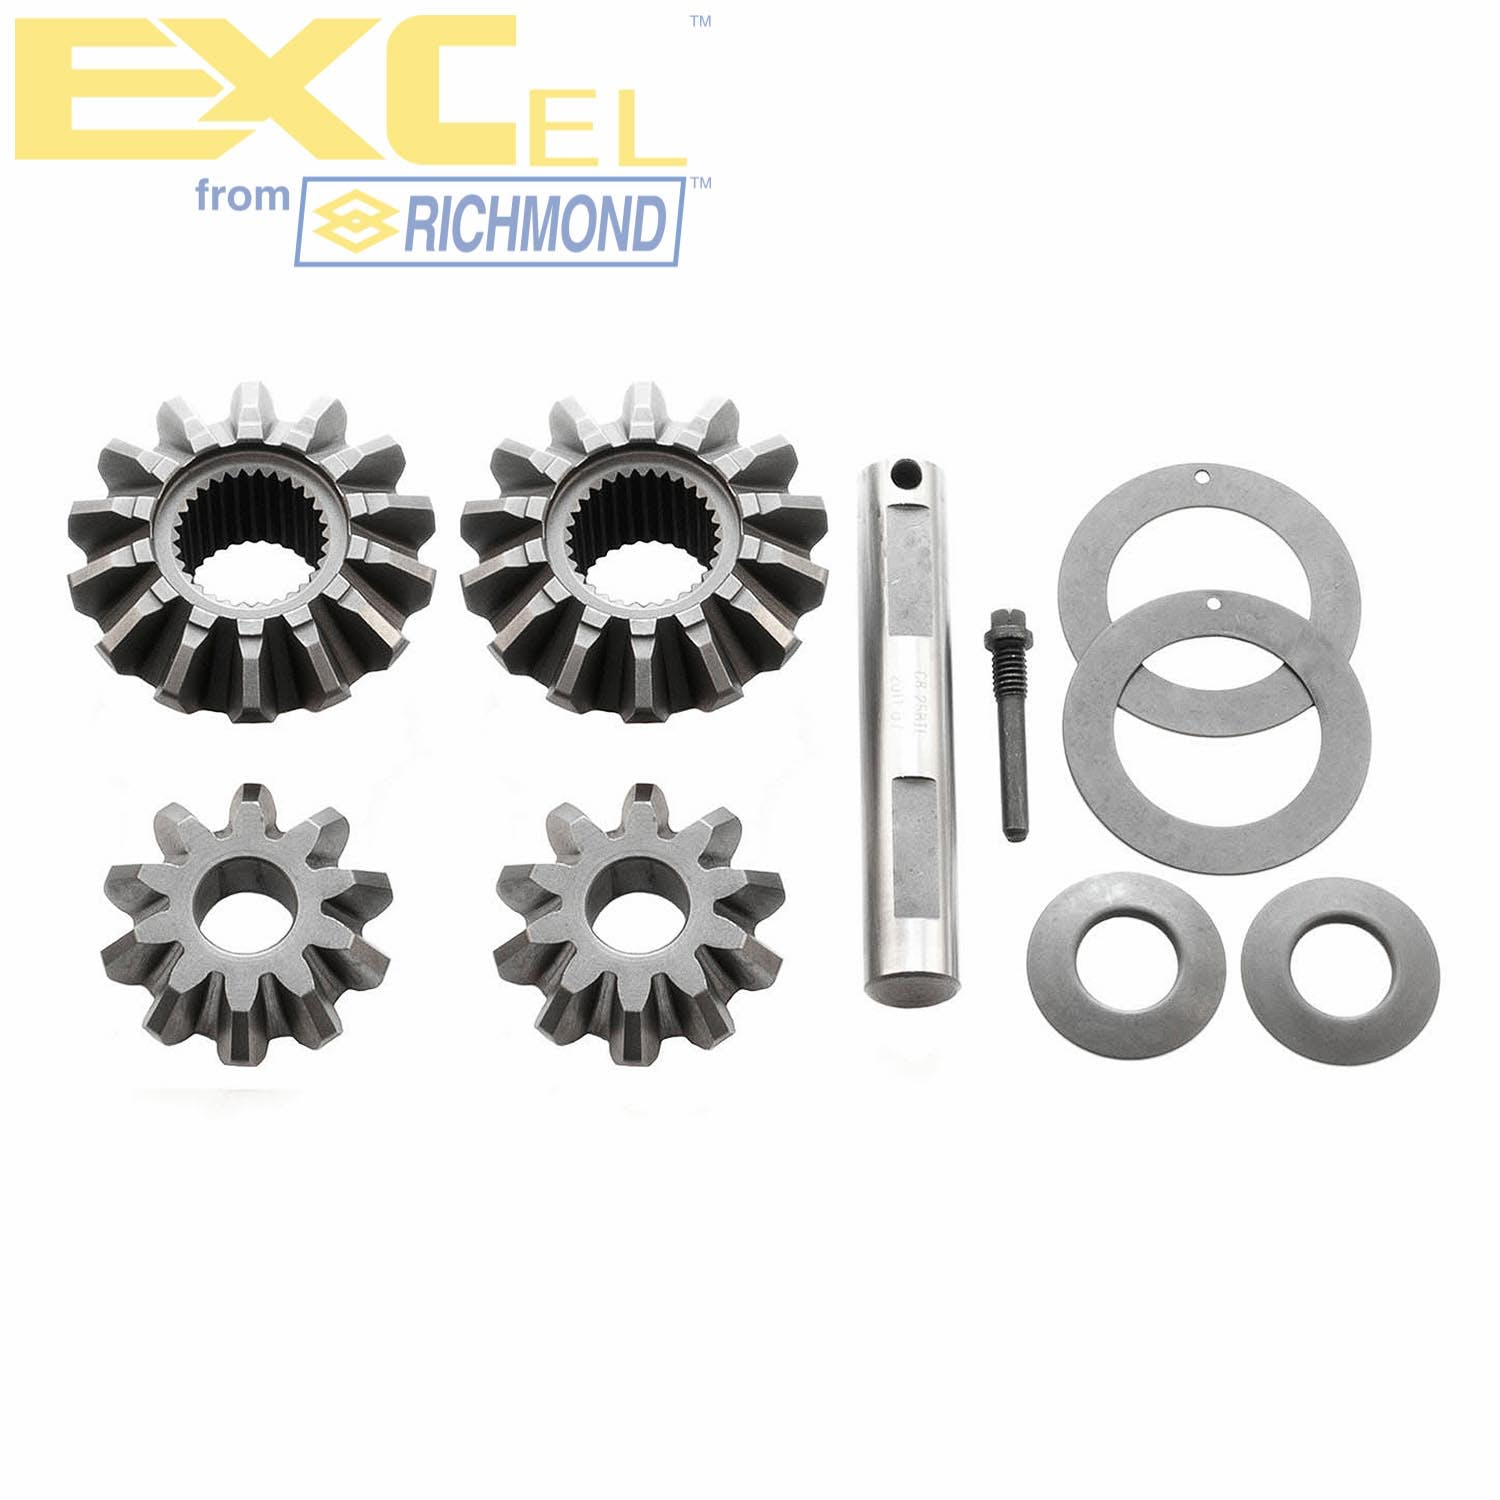 Excel XL-4005 Differential Carrier Gear Kit